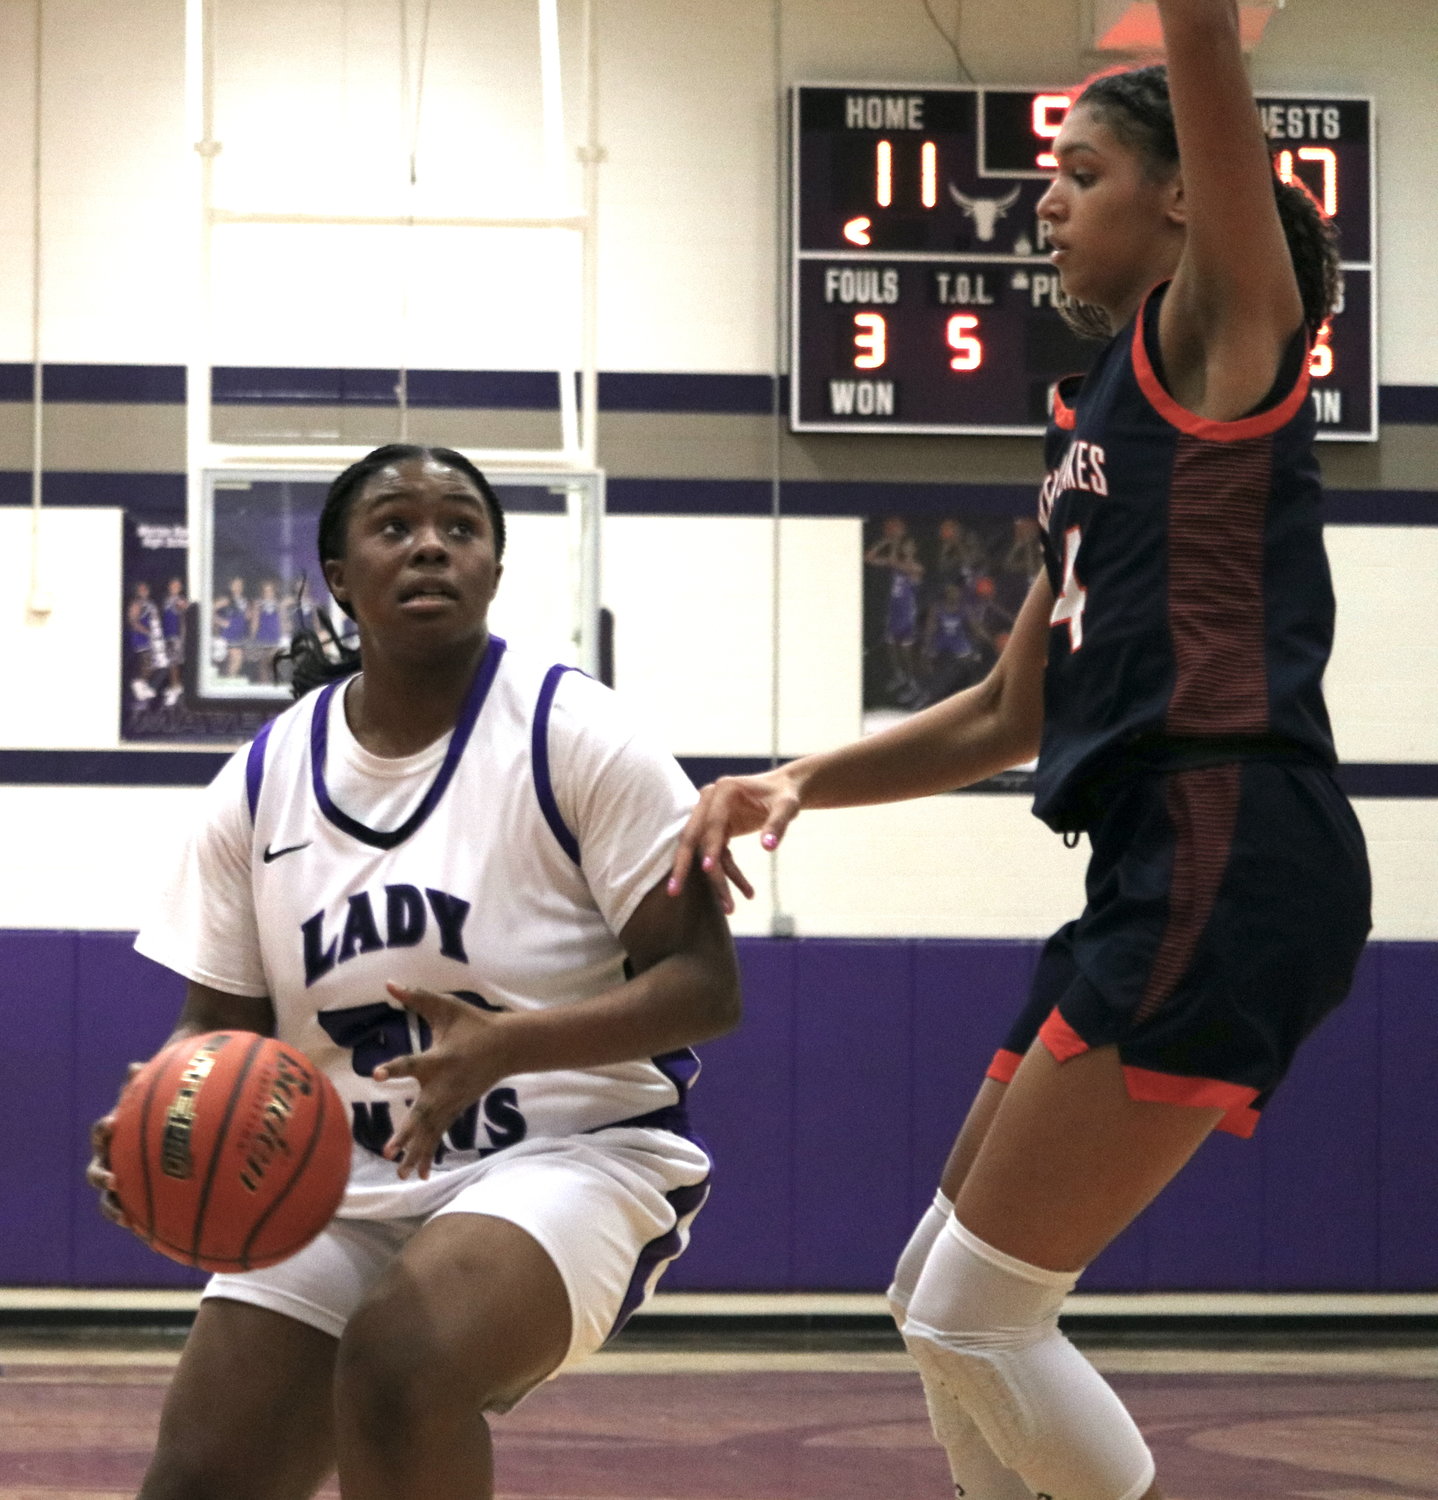 Divine Favor Ekuma tries to shoot while guarded by Madison Carlton during Friday's game between Seven Lakes and Morton Ranch at the Morton Ranch gym.